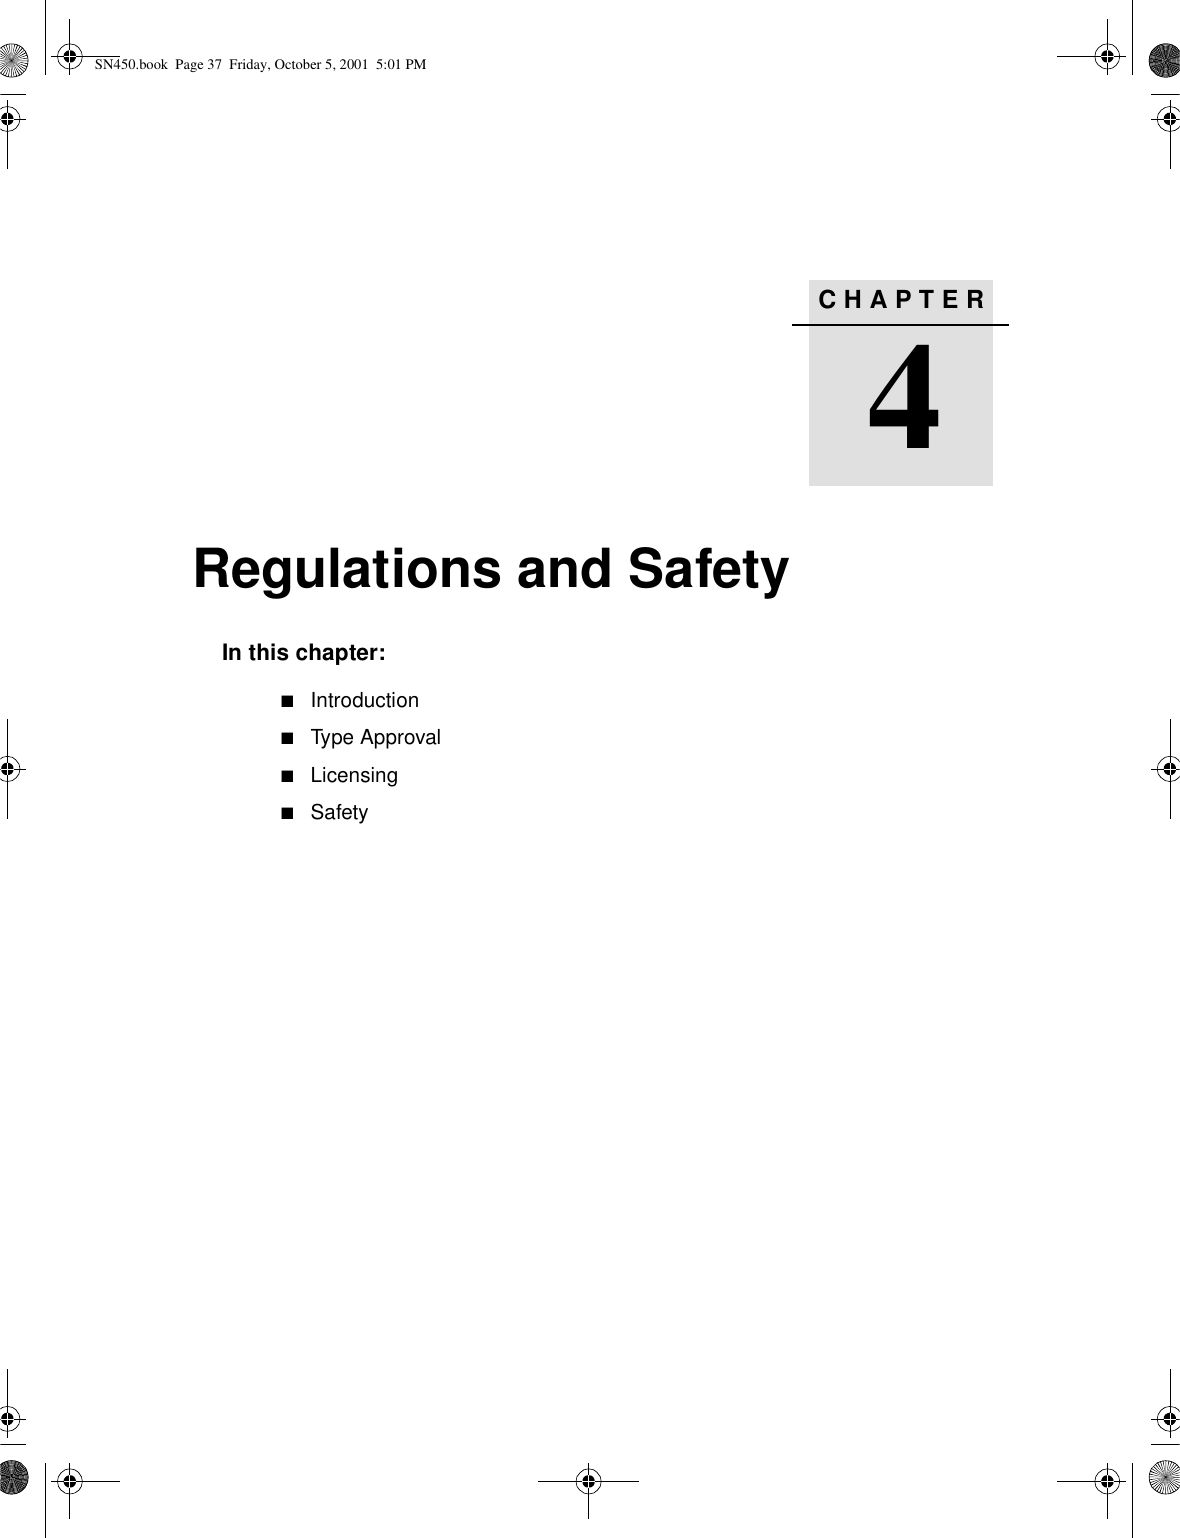 CHAPTER4Regulations and Safety4In this chapter:■Introduction■Type Approval■Licensing■SafetySN450.book  Page 37  Friday, October 5, 2001  5:01 PM